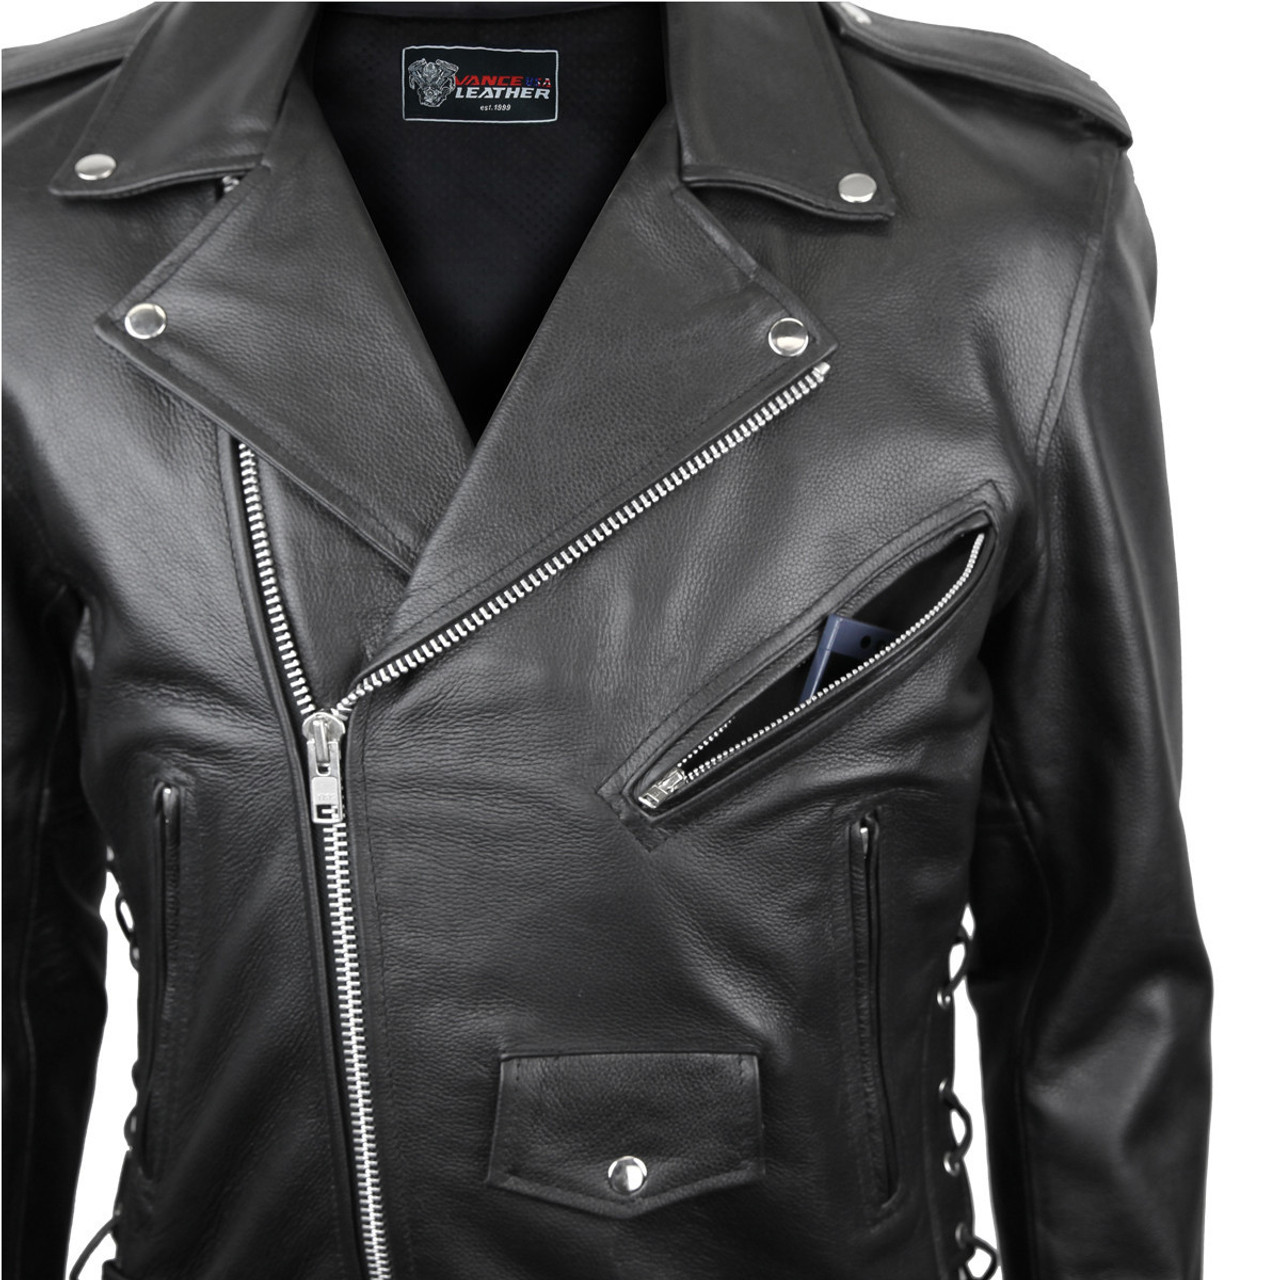 Men's Conceal Carry Insulated Liner Black Leather Jacket